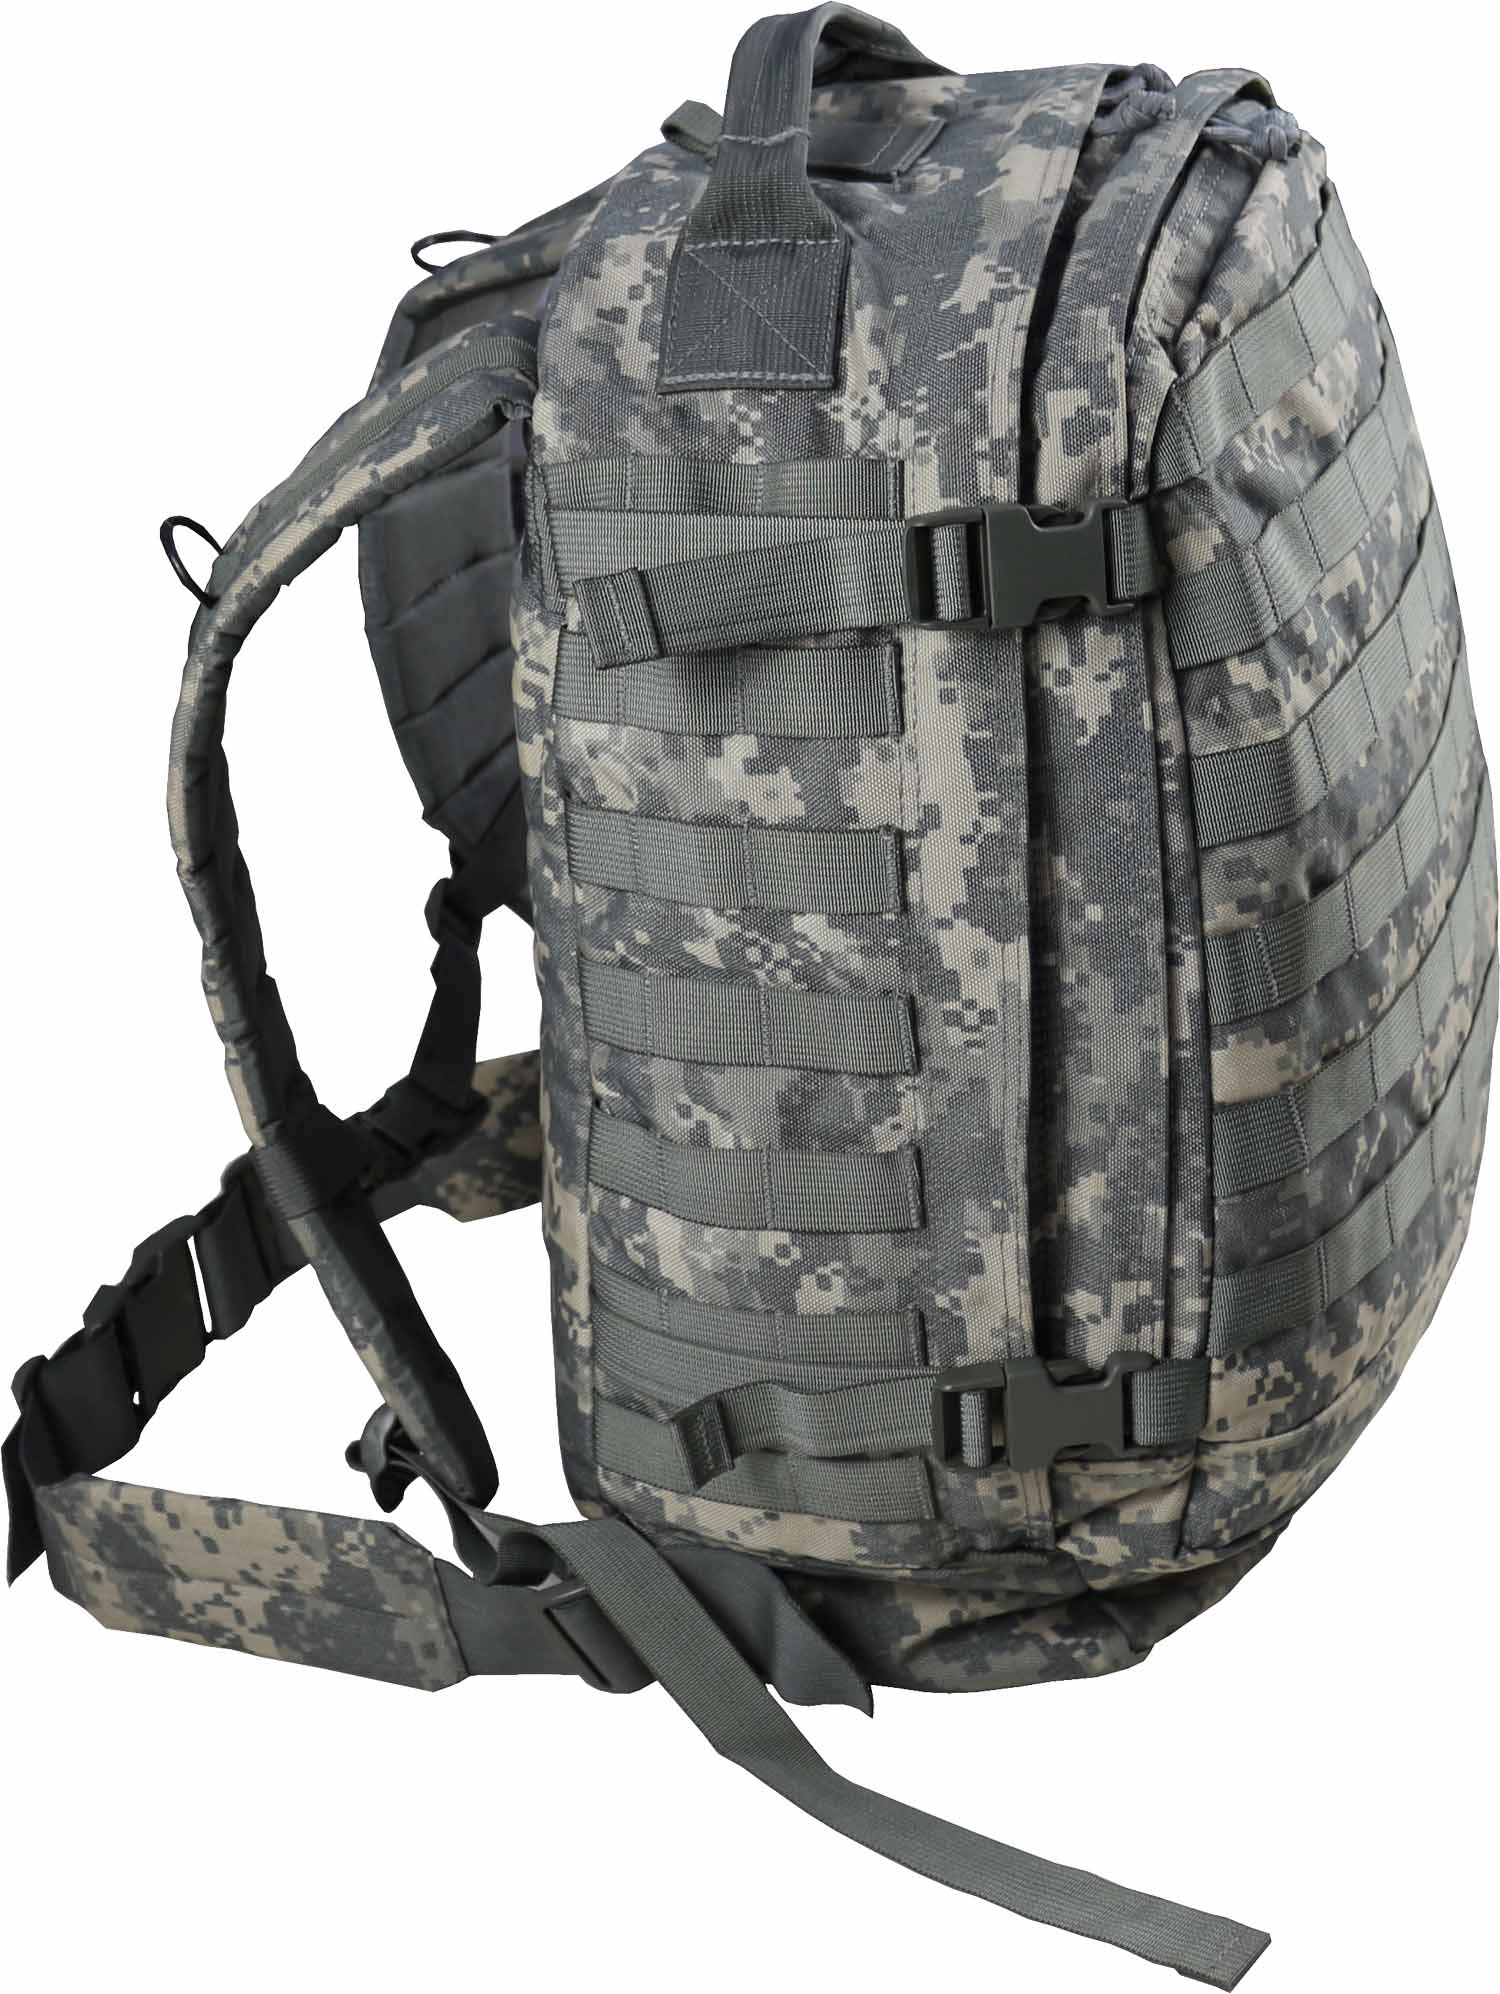 Tactical Backpack in High Quality Nylon Oxford